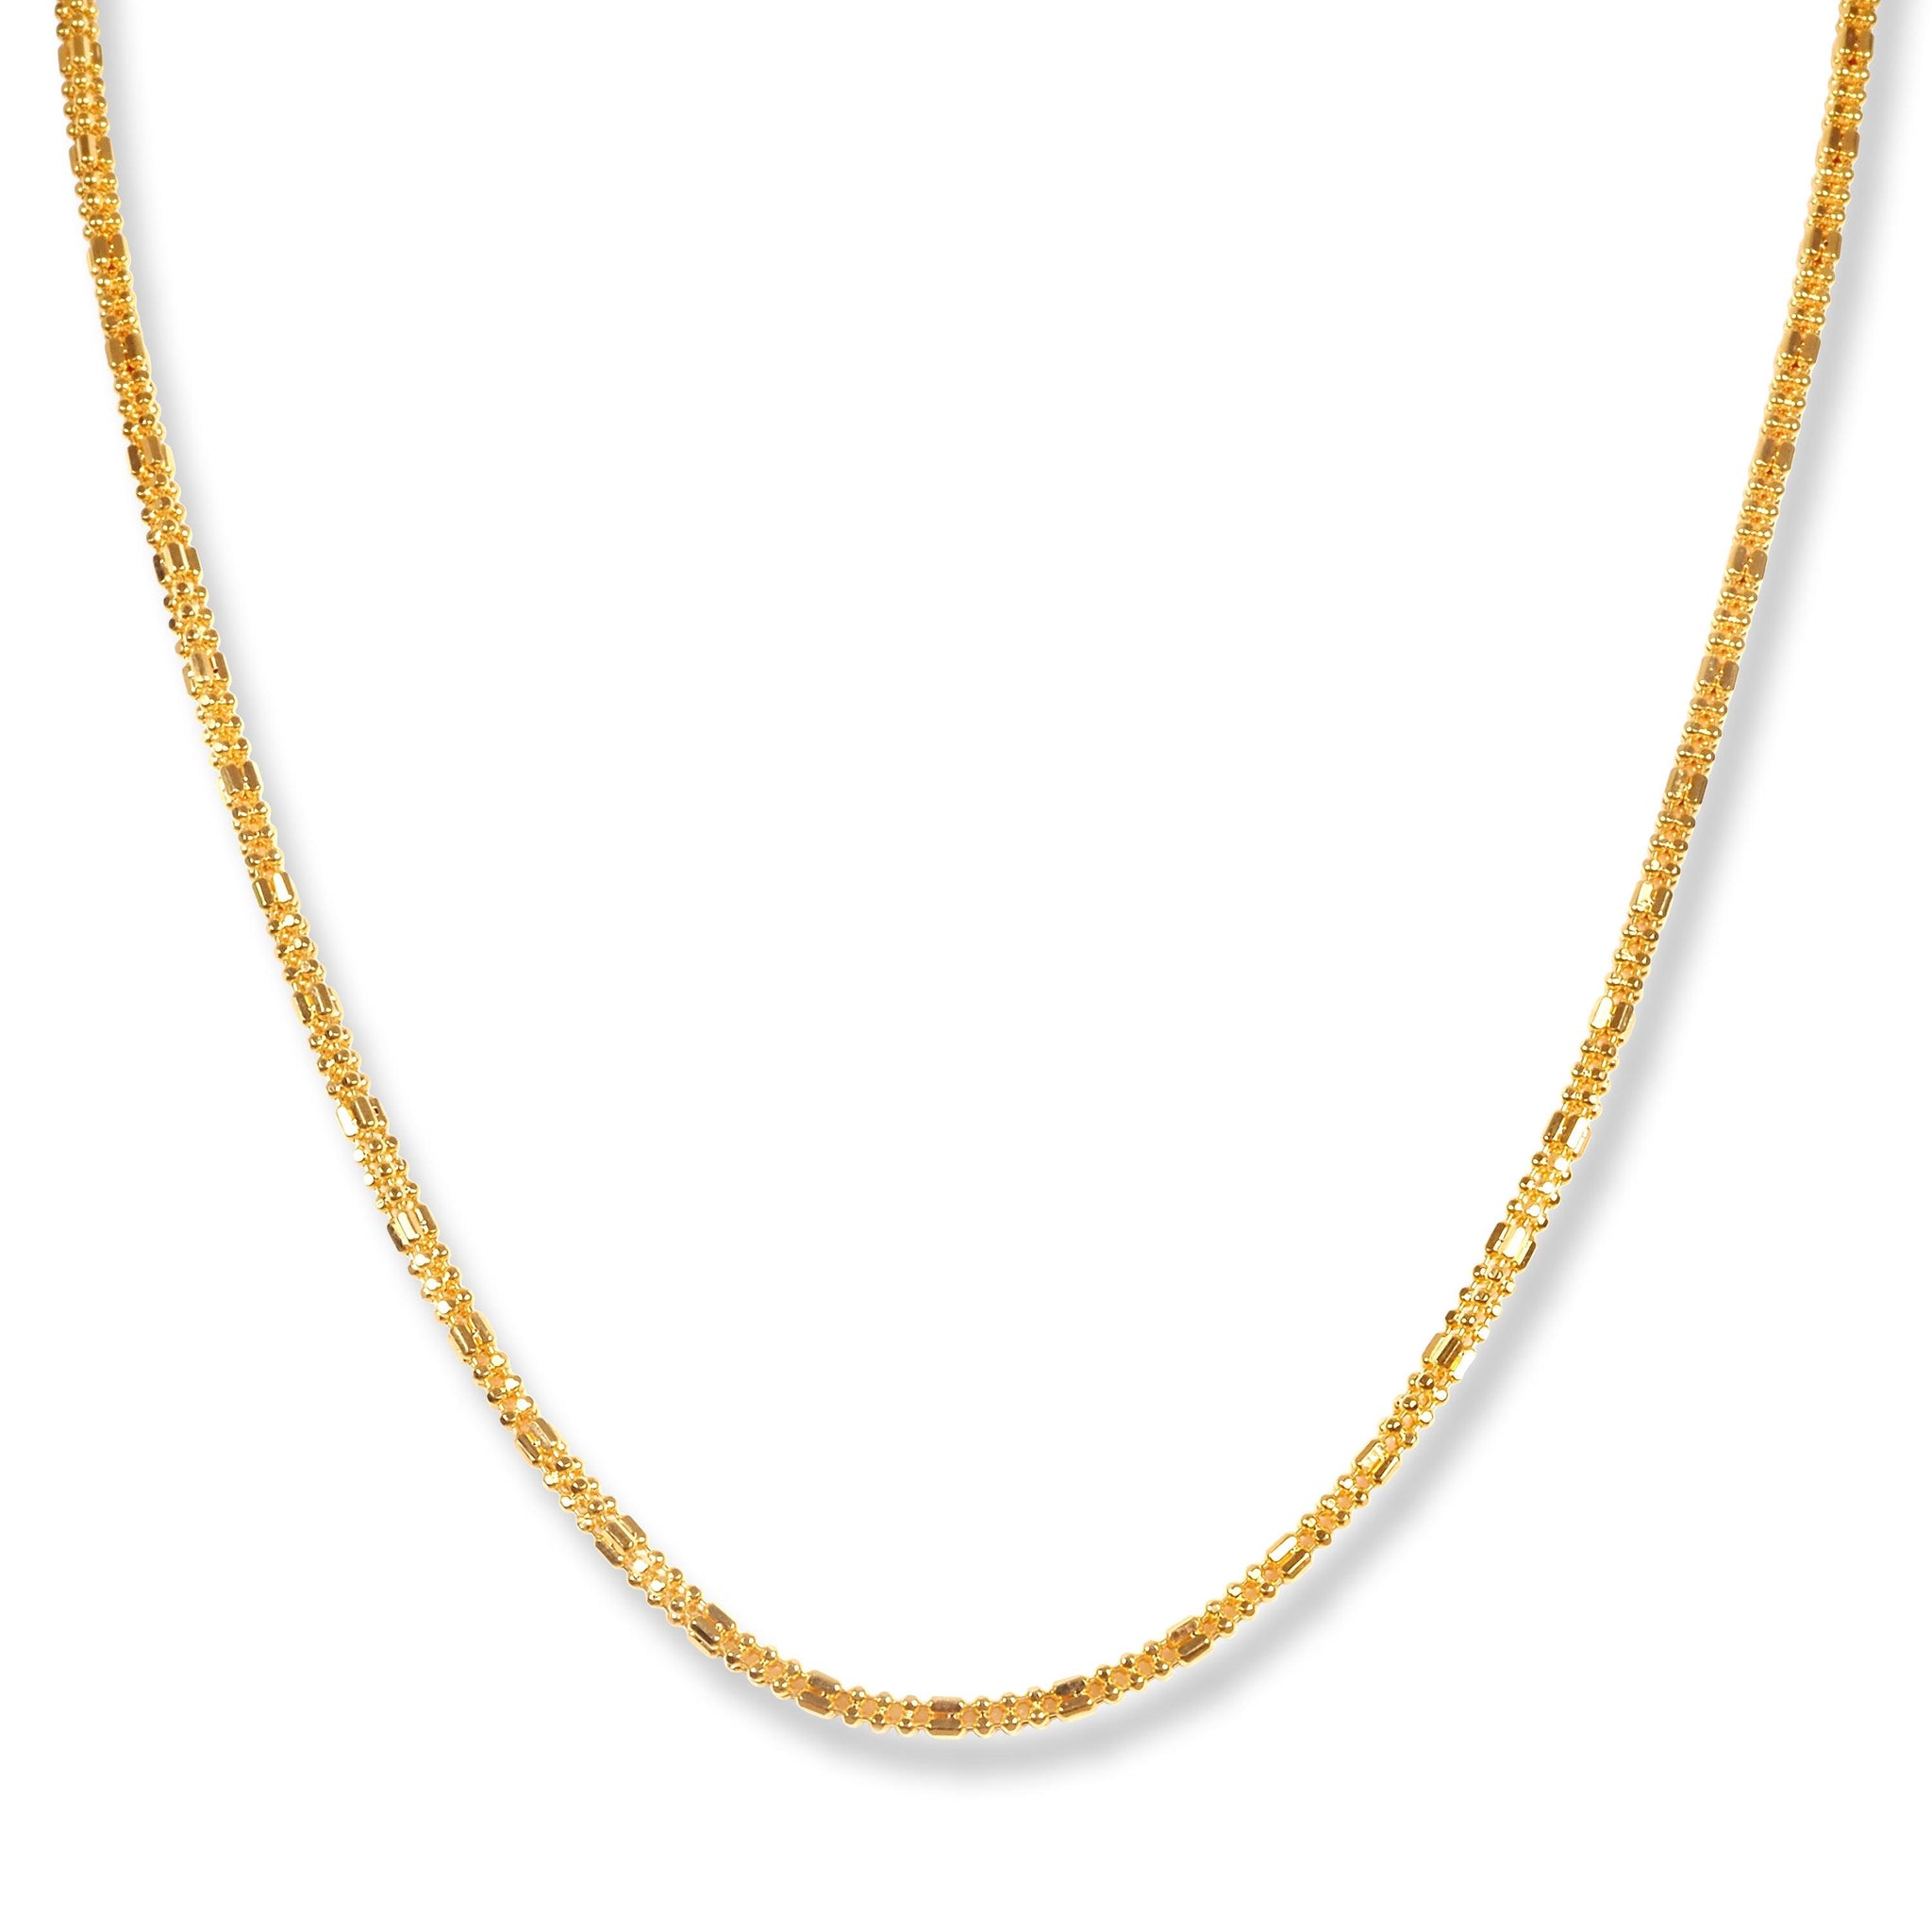 22ct Gold Beaded Interval Chain with S Clasp C-7143